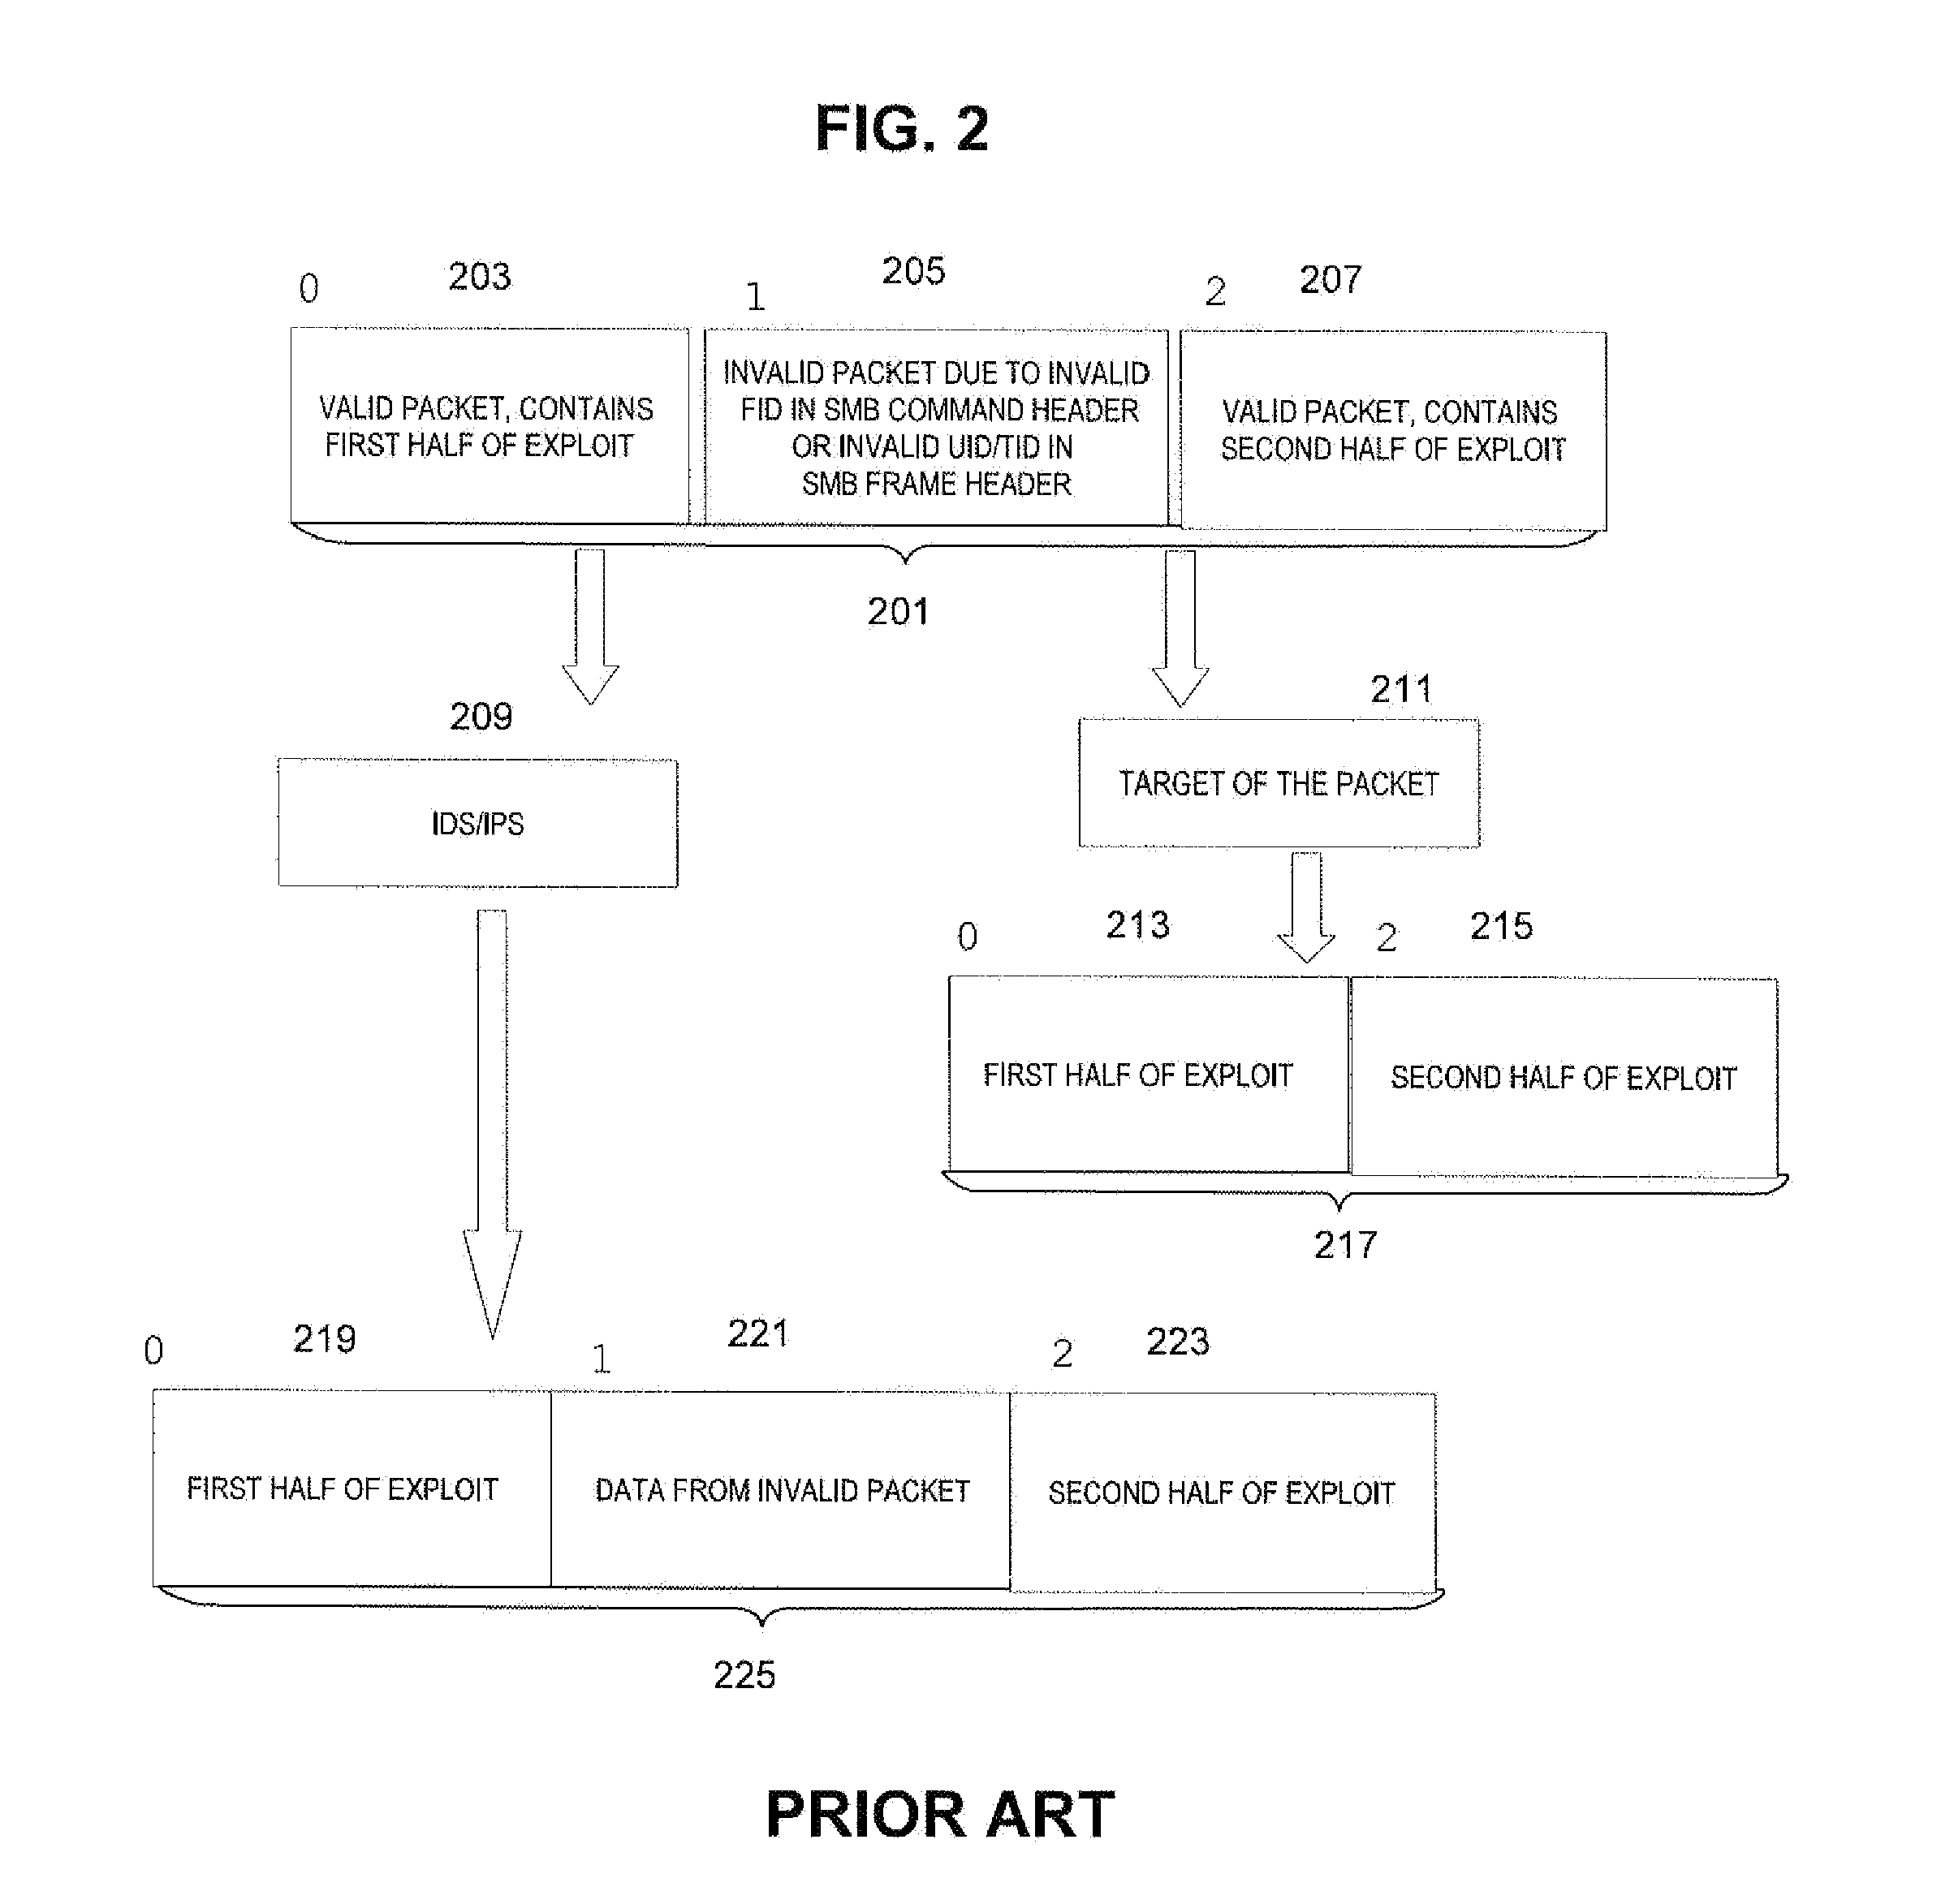 Target-based smb and dce/rpc processing for an intrusion detection system or intrusion prevention system